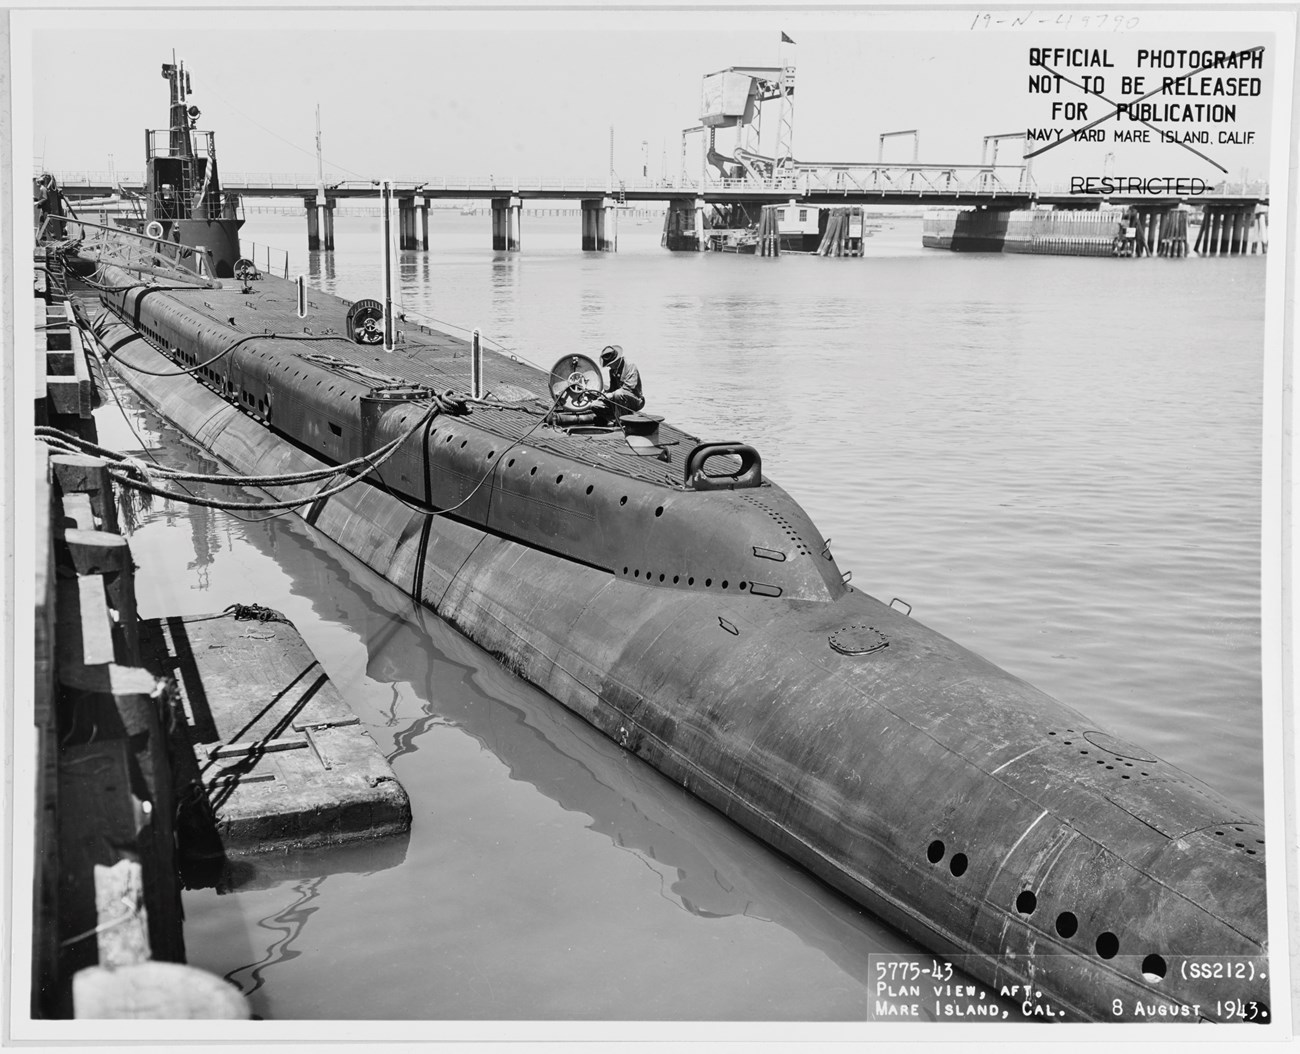 Long, narrow submarine partially above water, at a dock, with a person sitting by a top hatch.